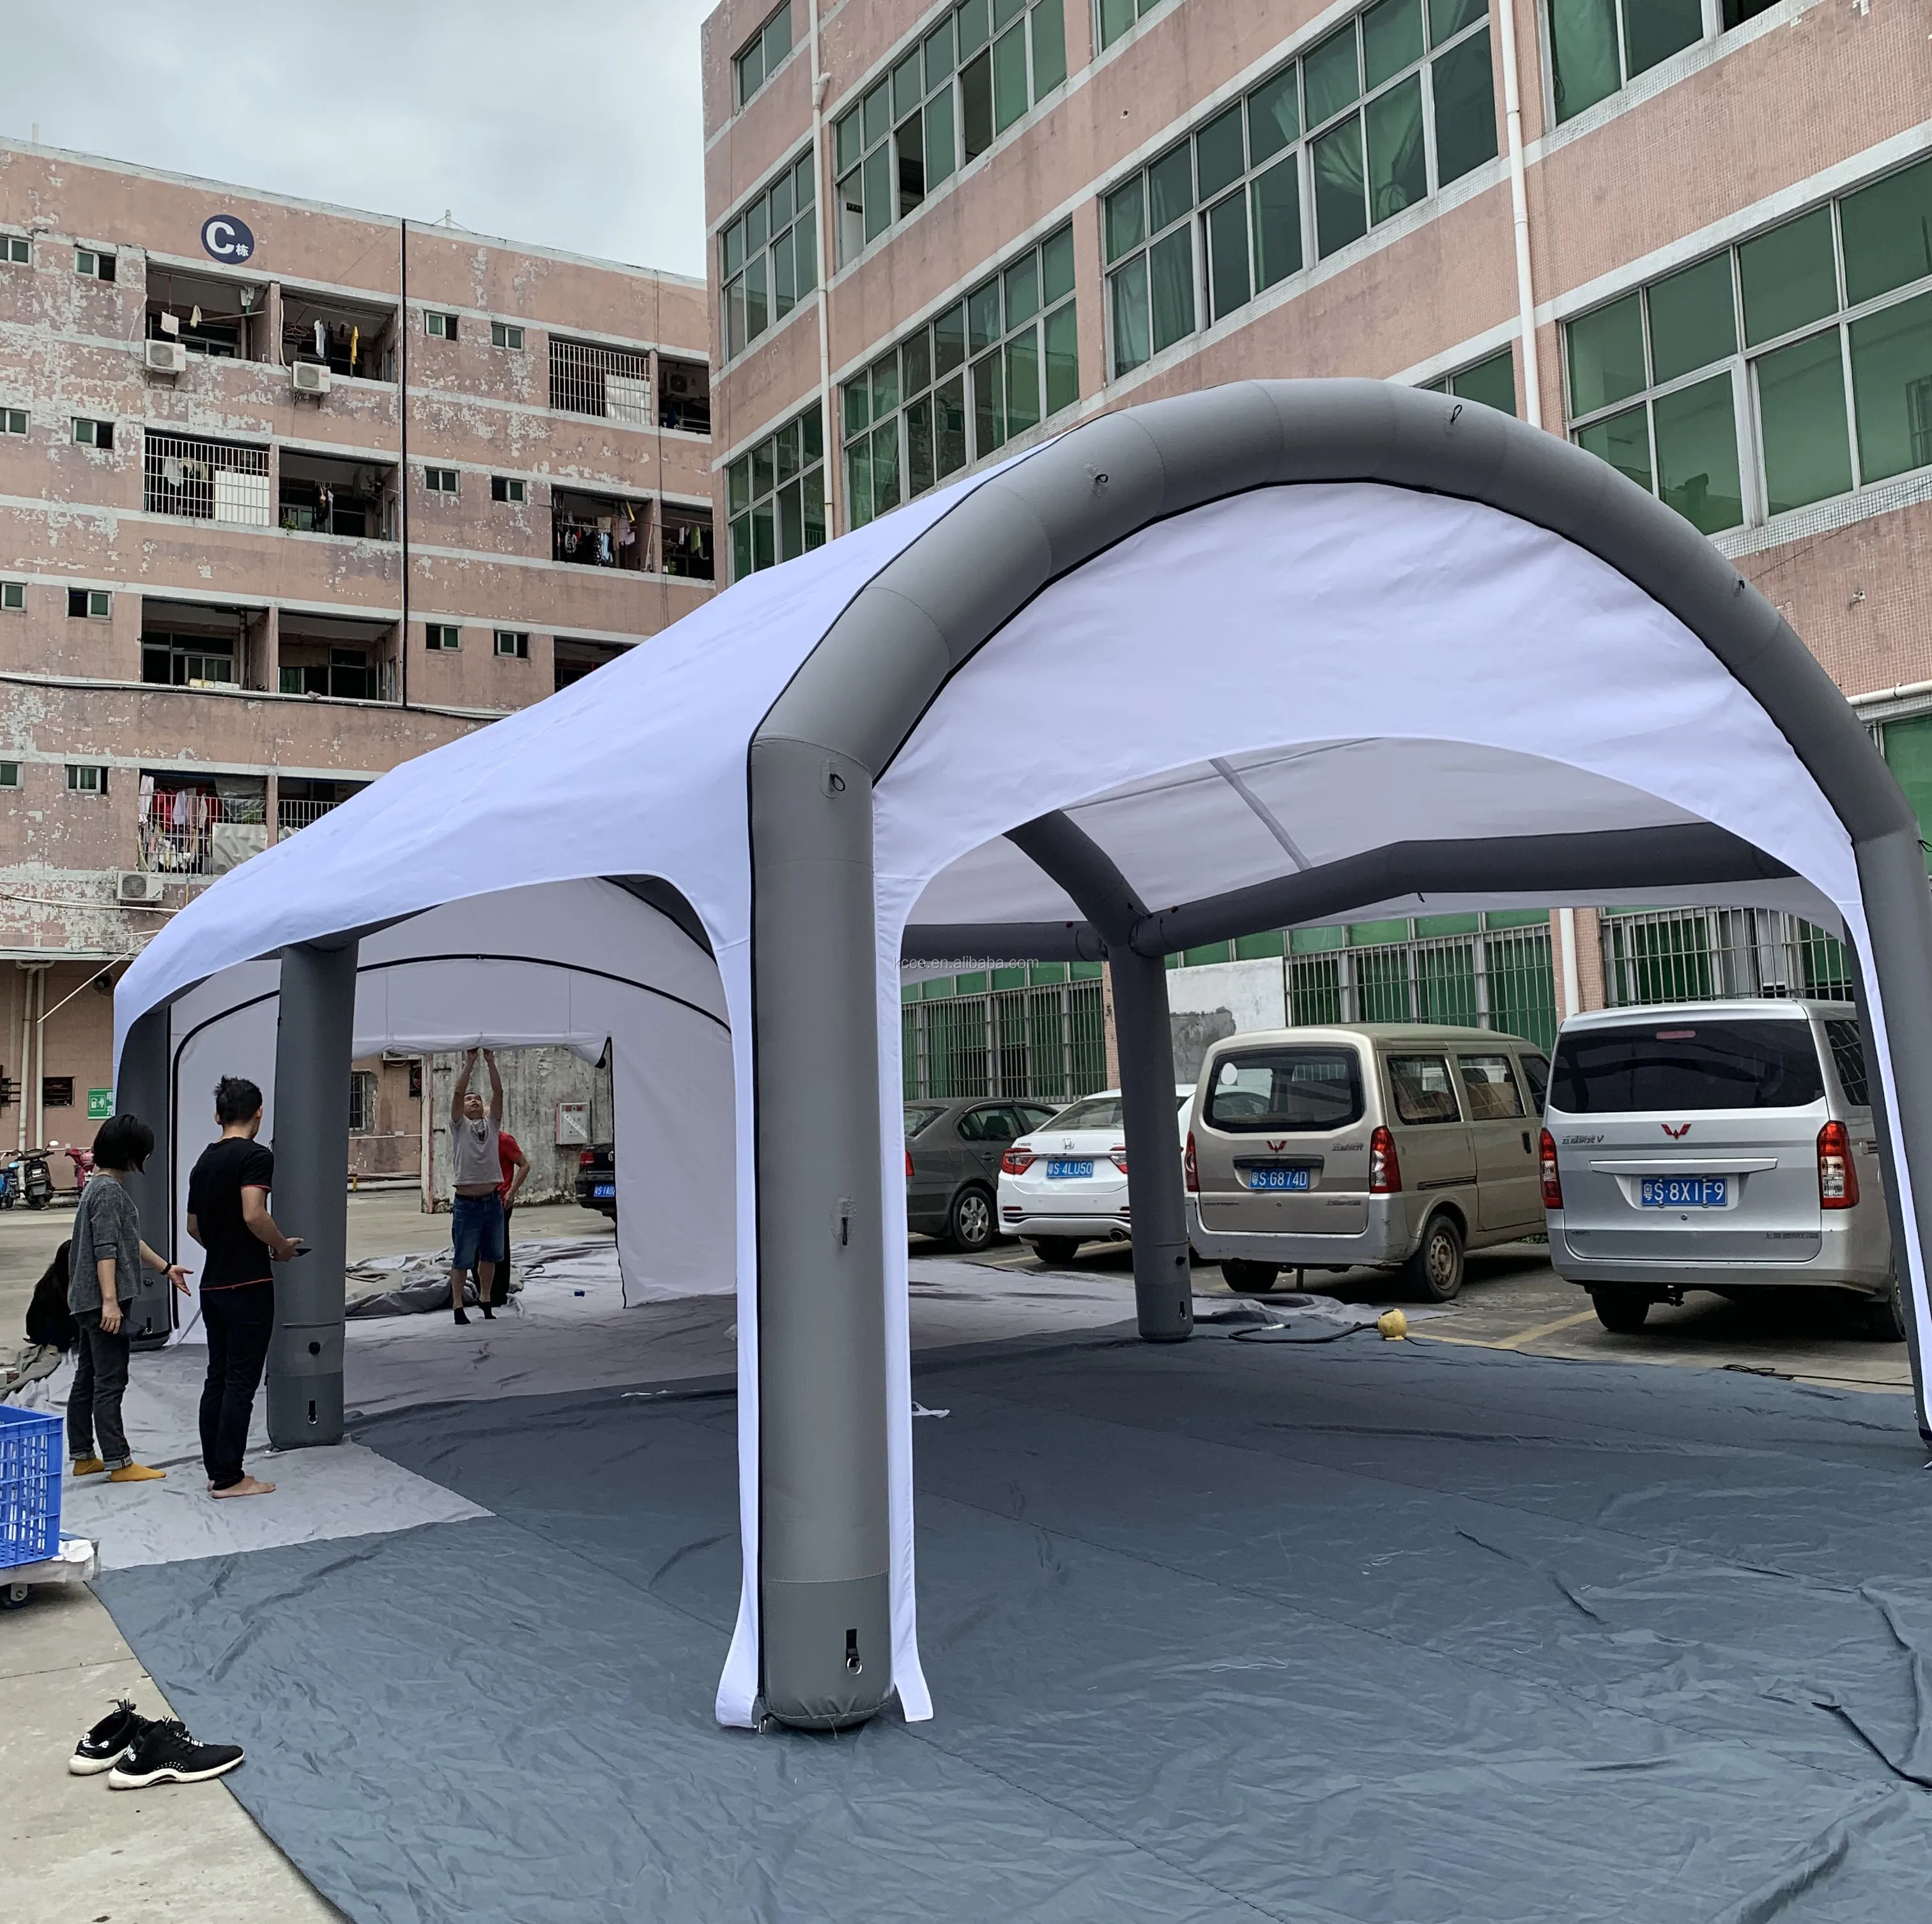 Air tight inflatable medical tent, emergency tunnel//